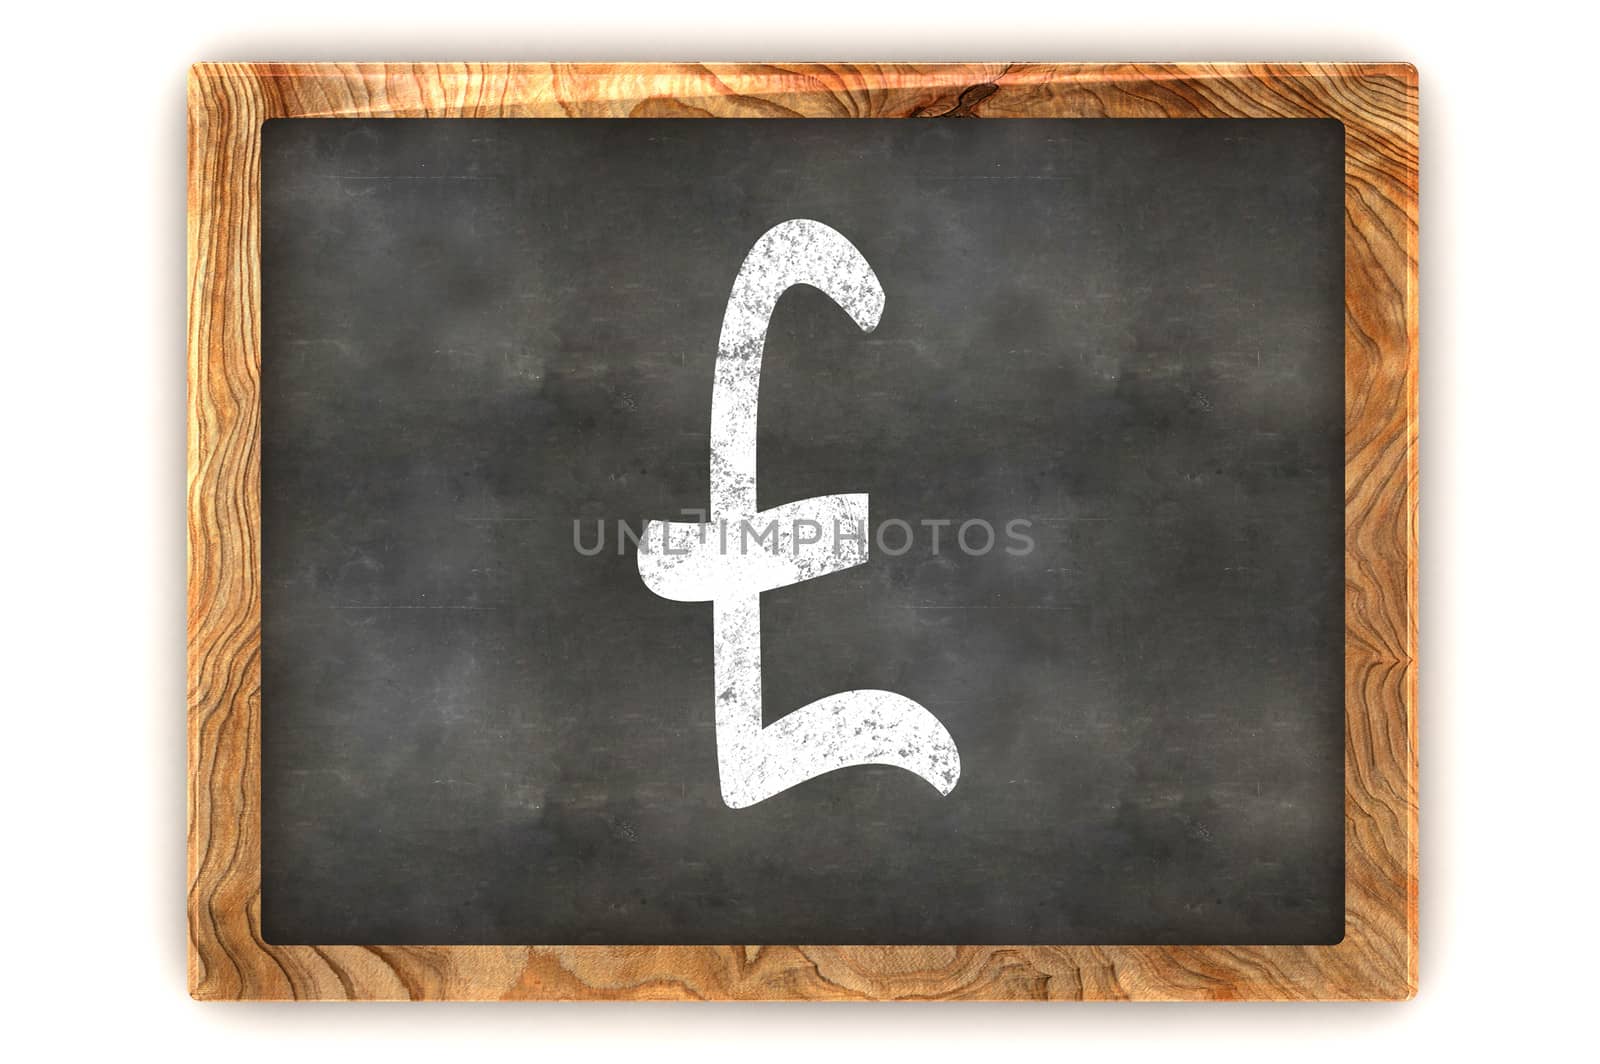 A Colourful 3d Rendered Illustration of a Blackboard showing a Pound Sign